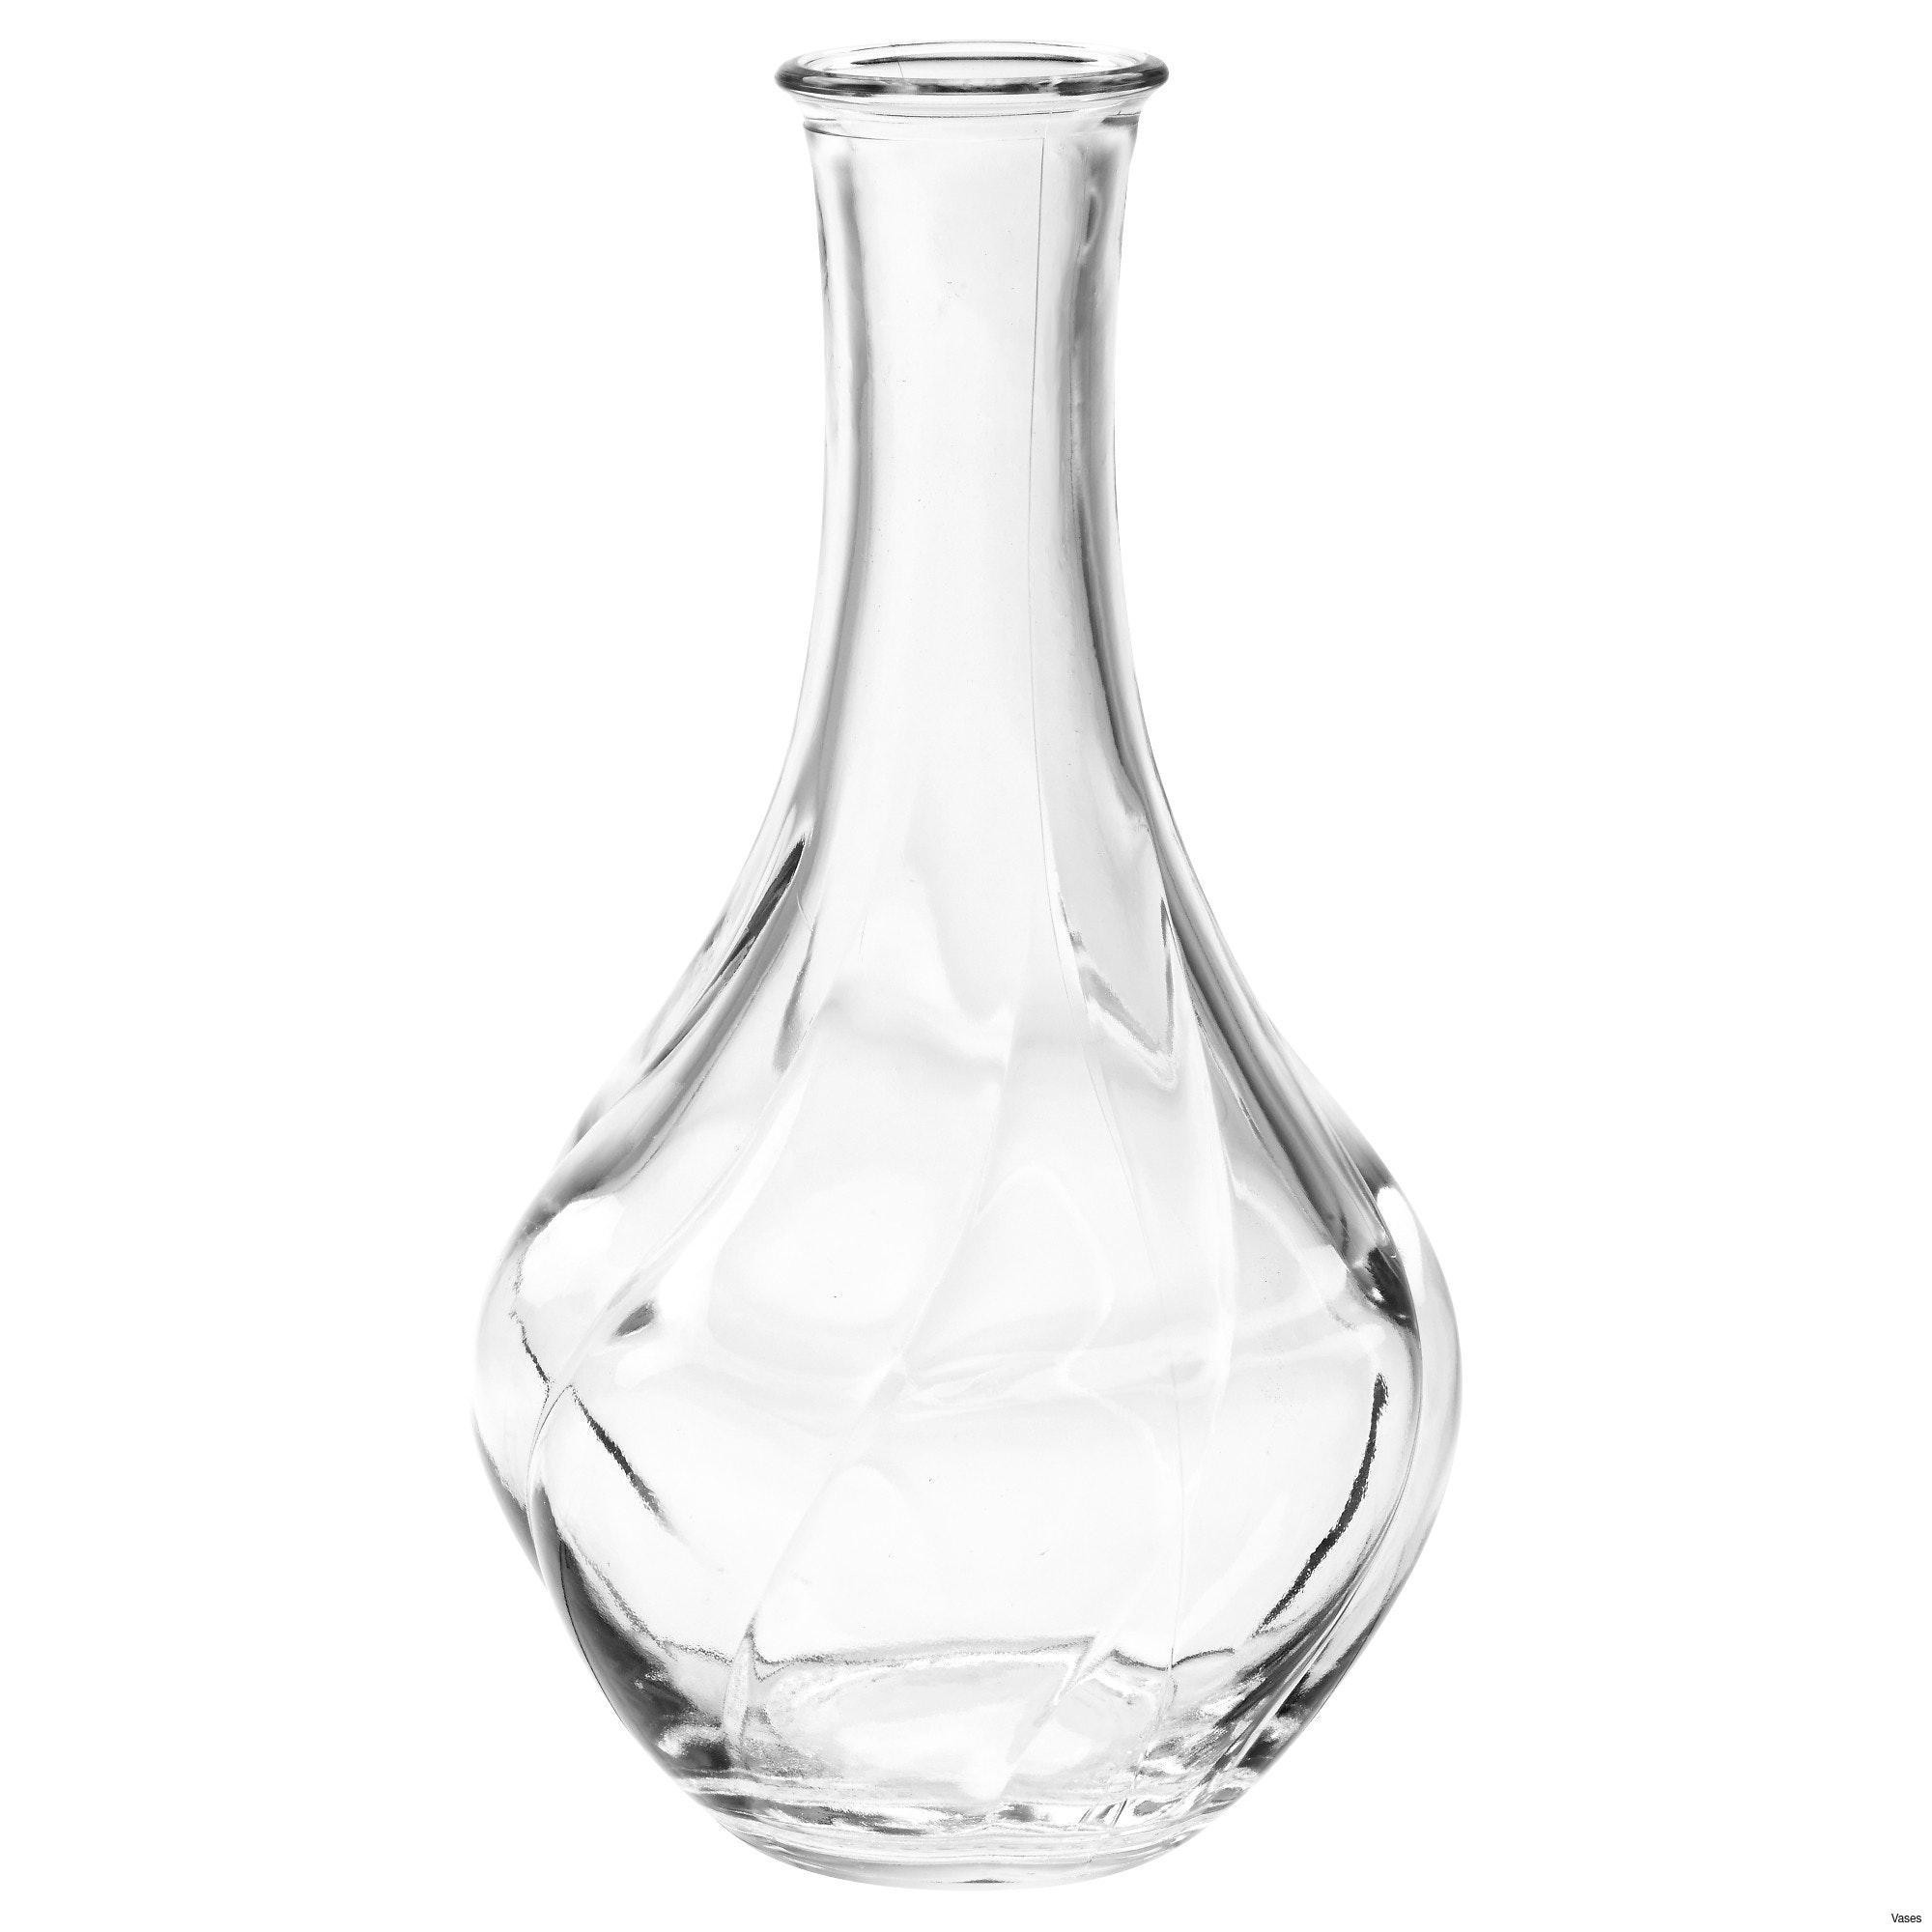 tall fluted glass vase of heavy glass vase images l h vases 12 inch hurricane clear glass vase regarding heavy glass vase gallery living room glass vases fresh clear vase 0d tags amazing and of